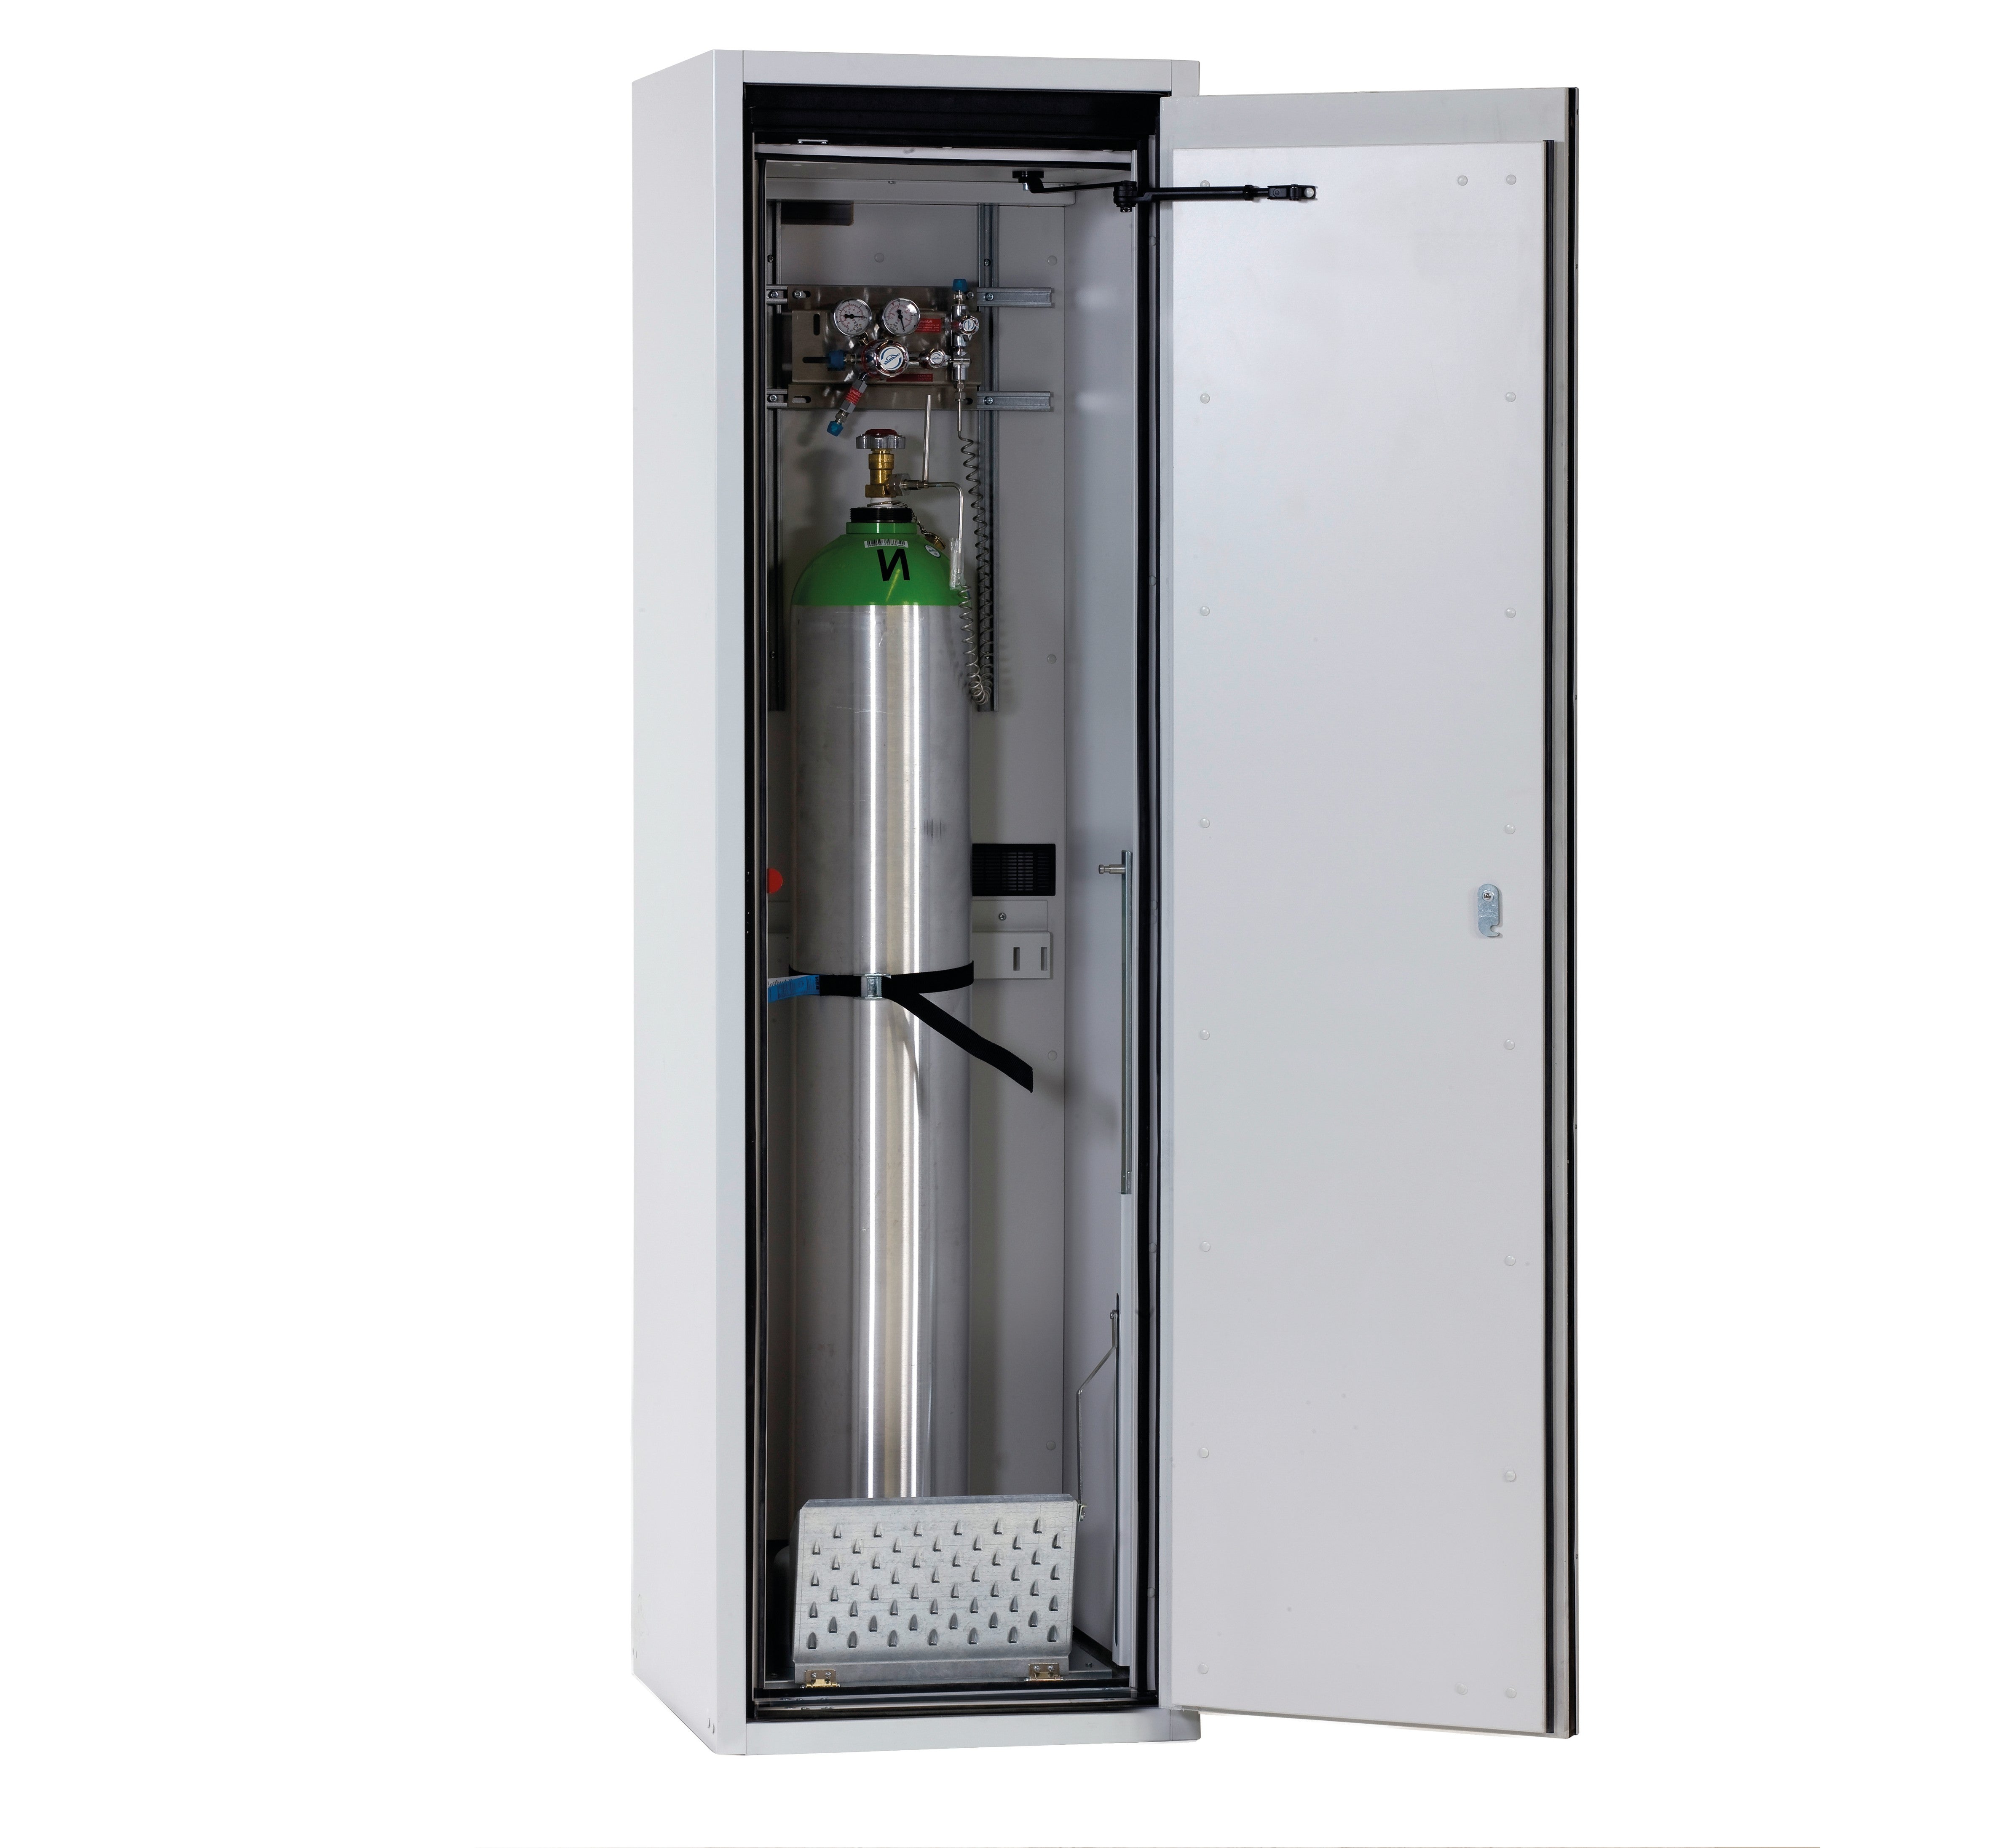 Type 90 compressed gas bottle cabinet G-ULTIMATE-90 model G90.205.060.R in light gray RAL 7035 with comfortable interior fittings for 1x compressed gas bottles of 50 liters each